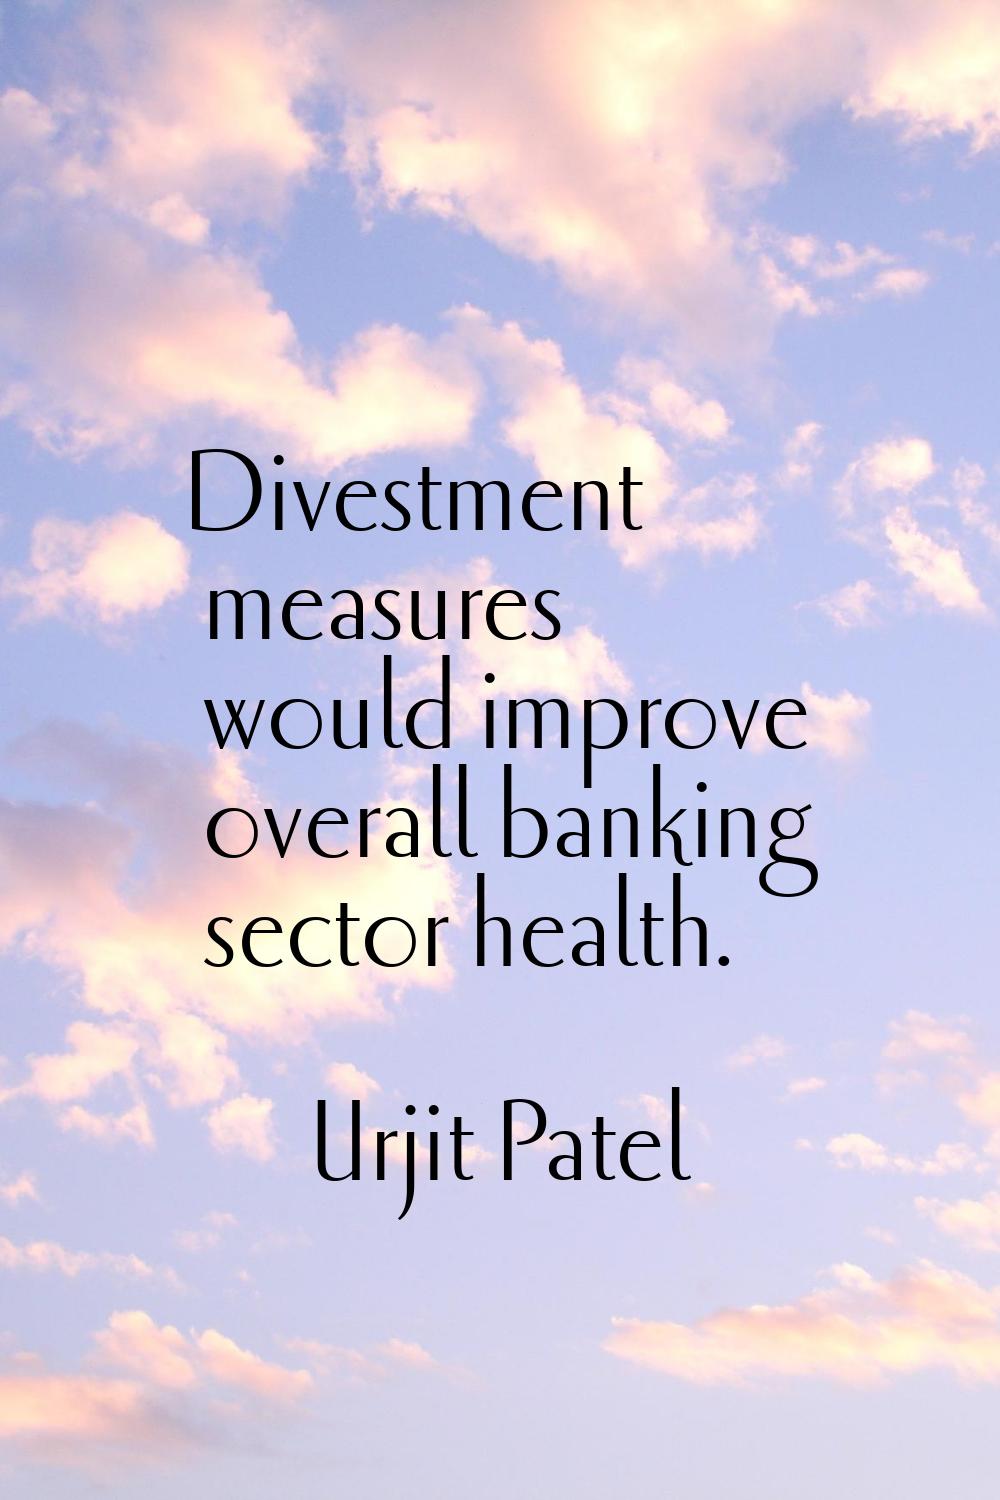 Divestment measures would improve overall banking sector health.